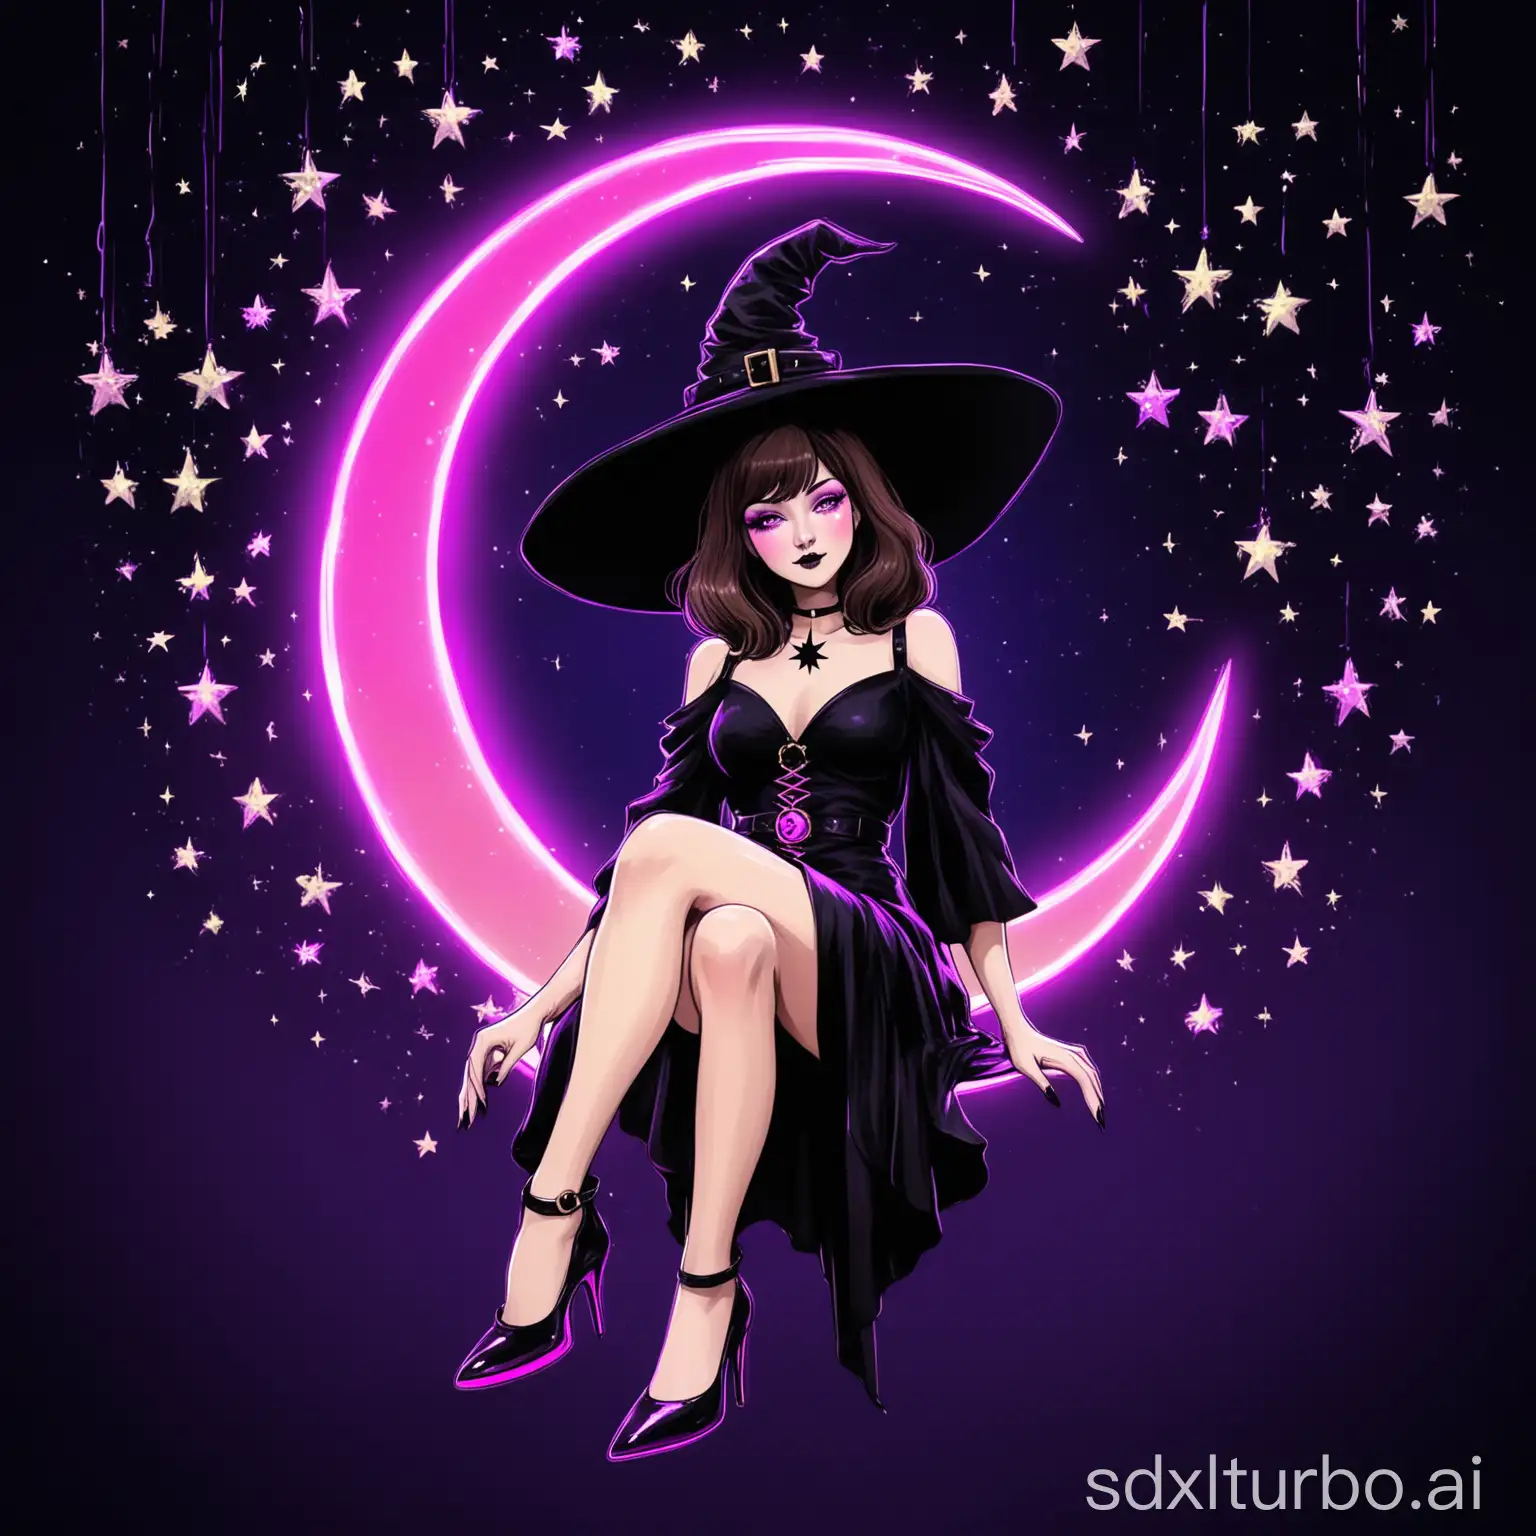 beautiful woman with pink purple witch hat and medium brown hair, sitting inside the crest of a neon crescent moon with her legs crossed wearing black heels with a strap, witchy style